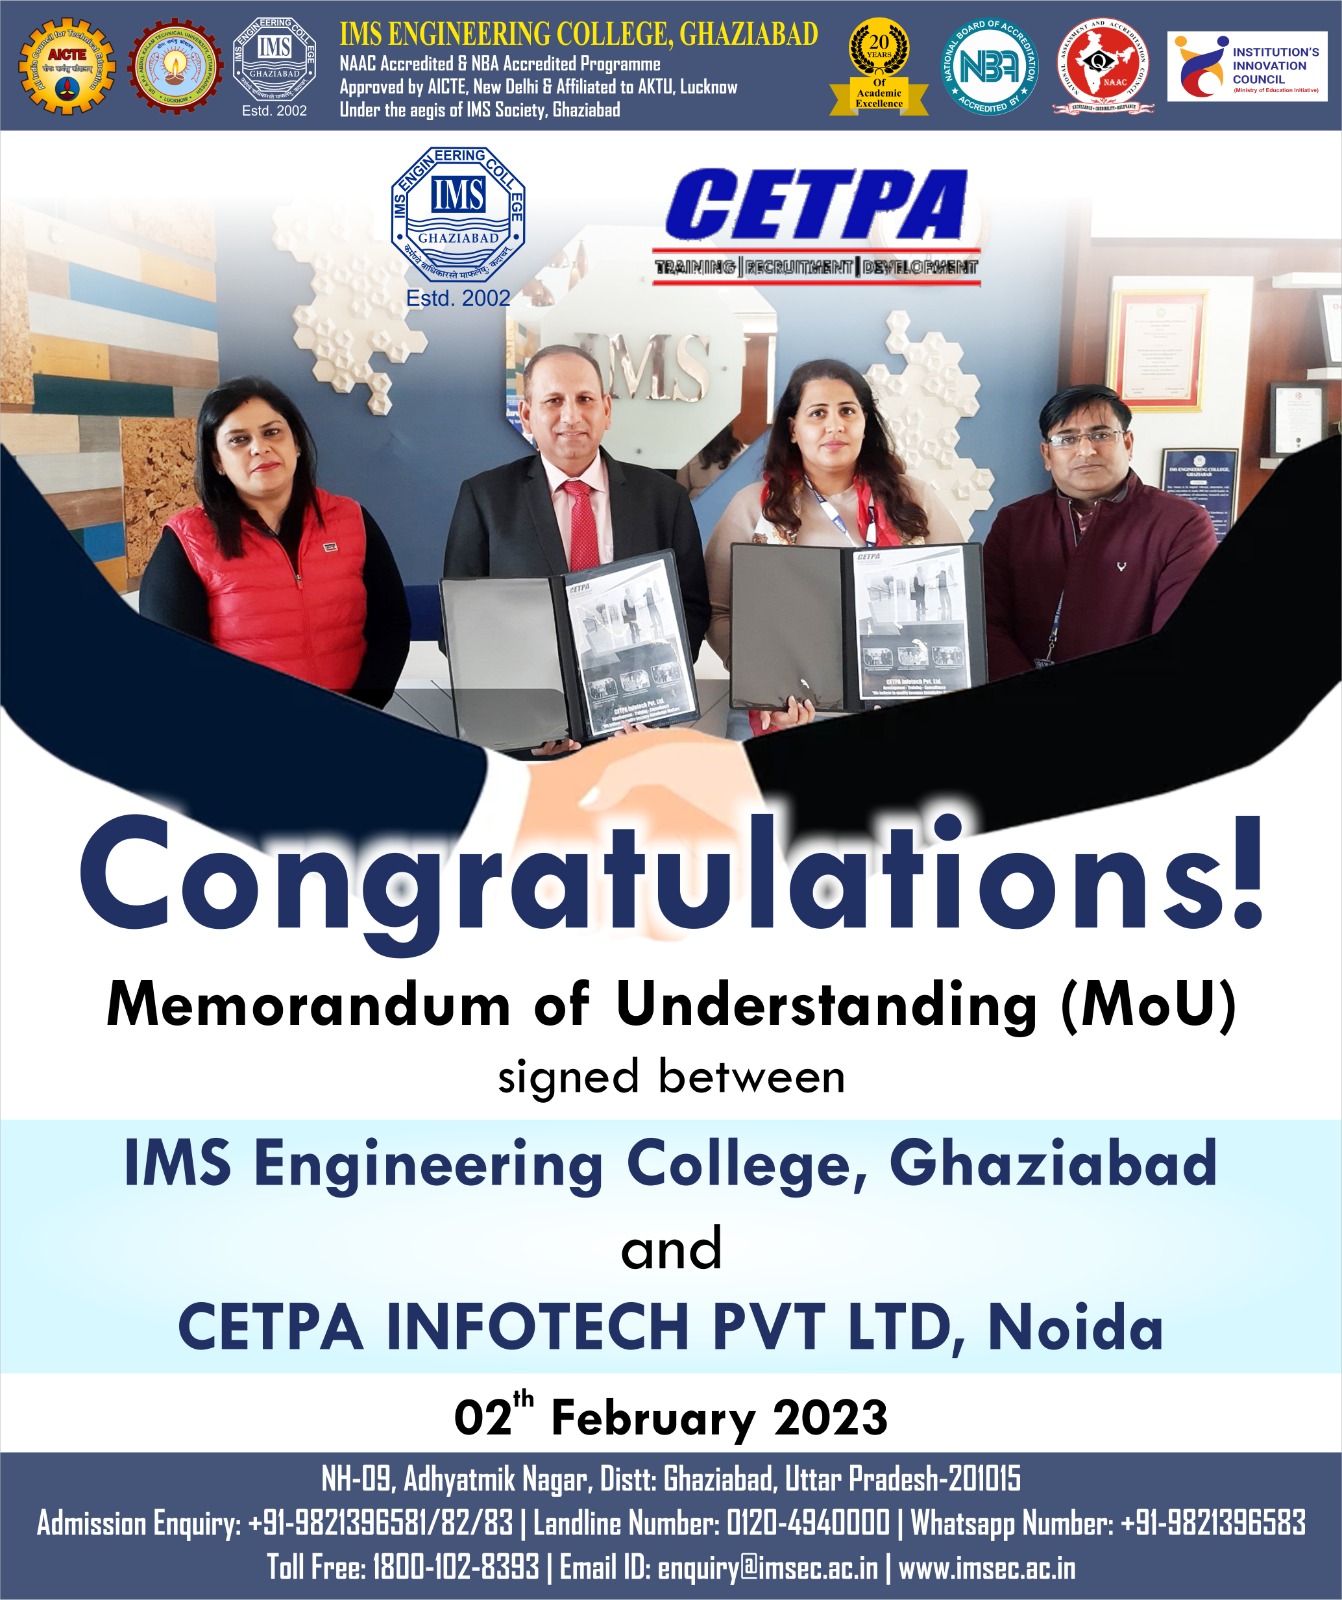 MoU Signed with Cetpa Infotech Pvt Ltd